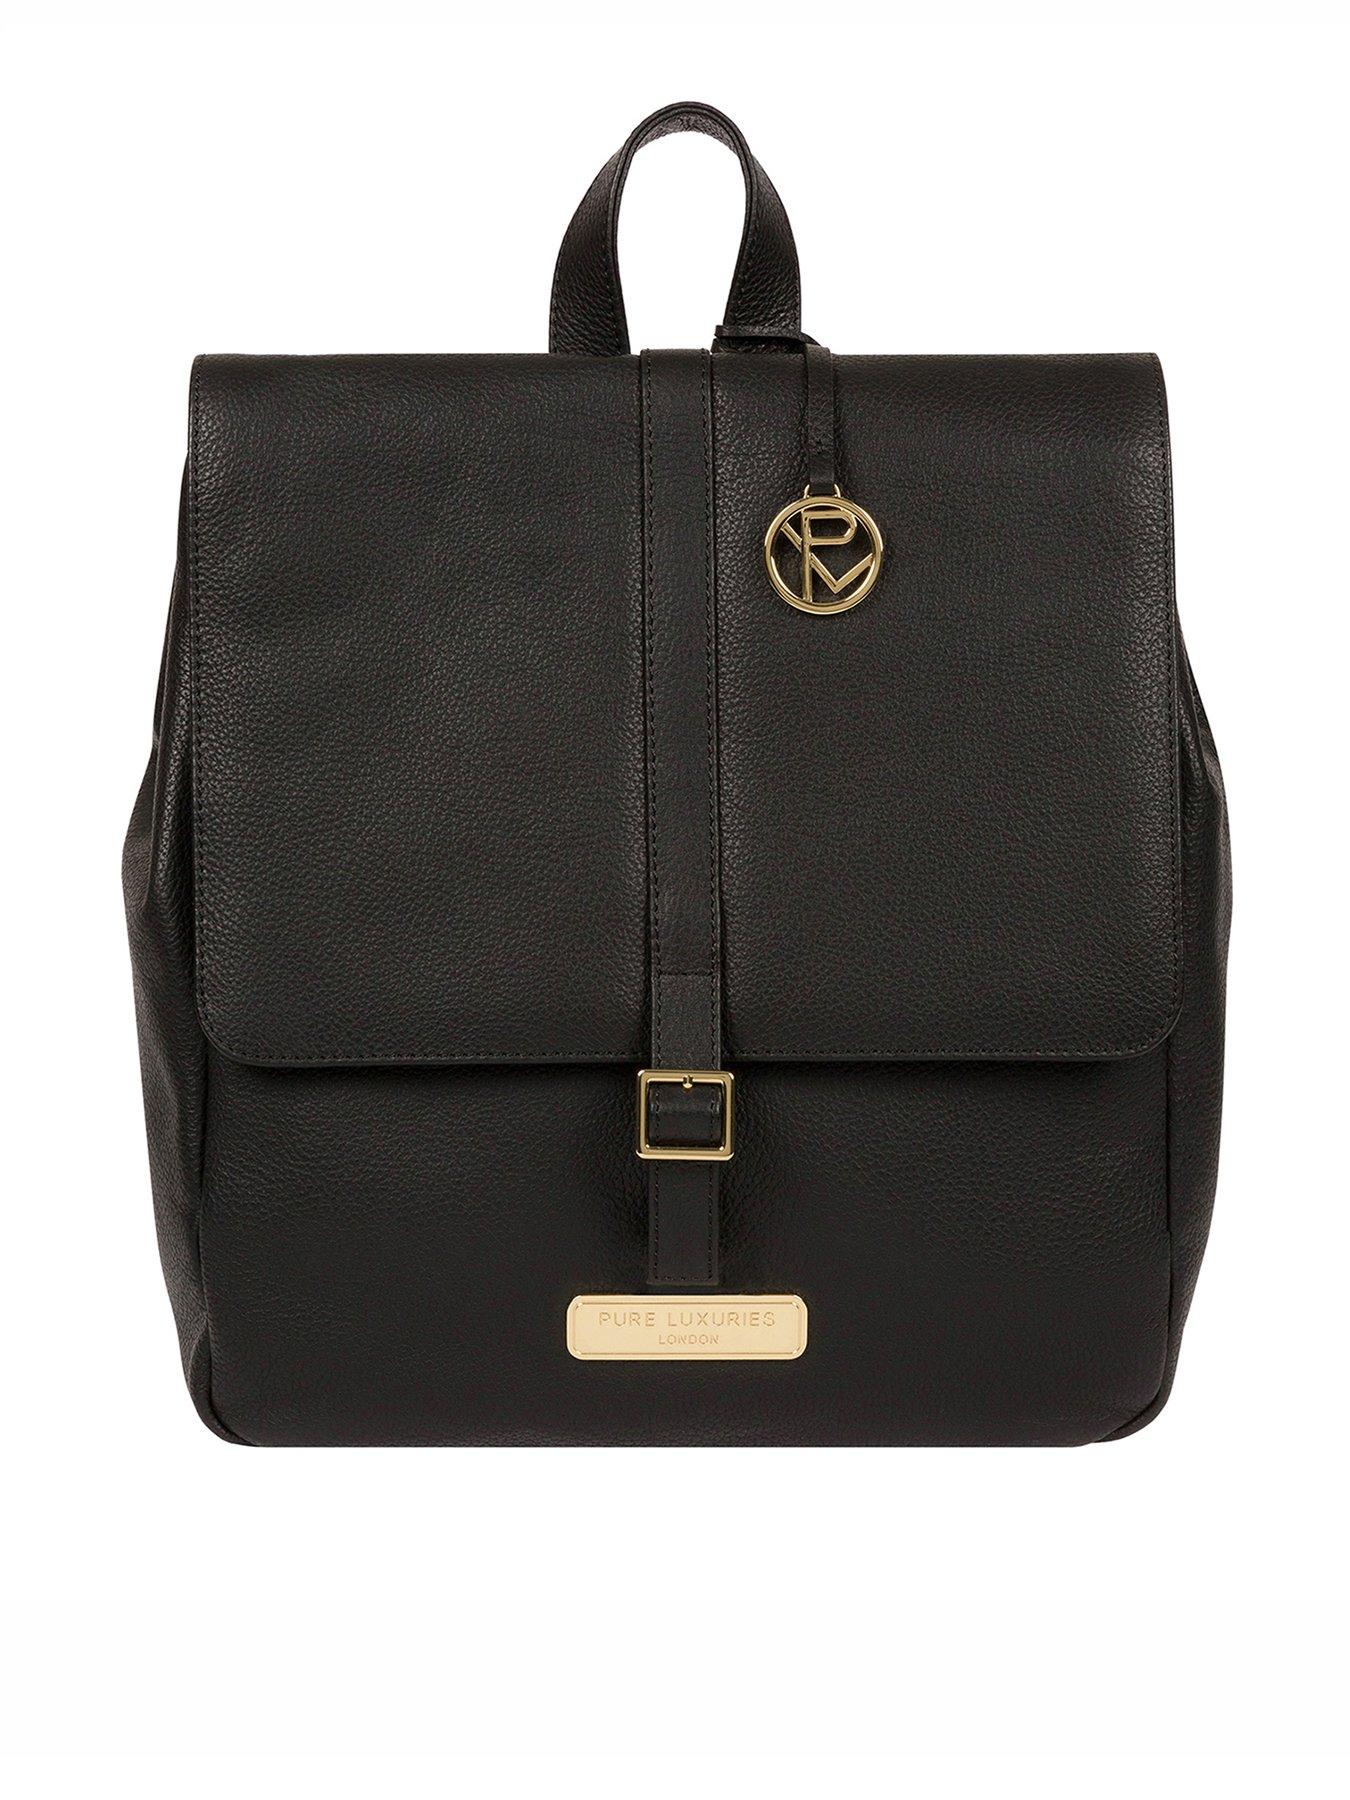  Daisy Flap Over Leather Backpack - Black